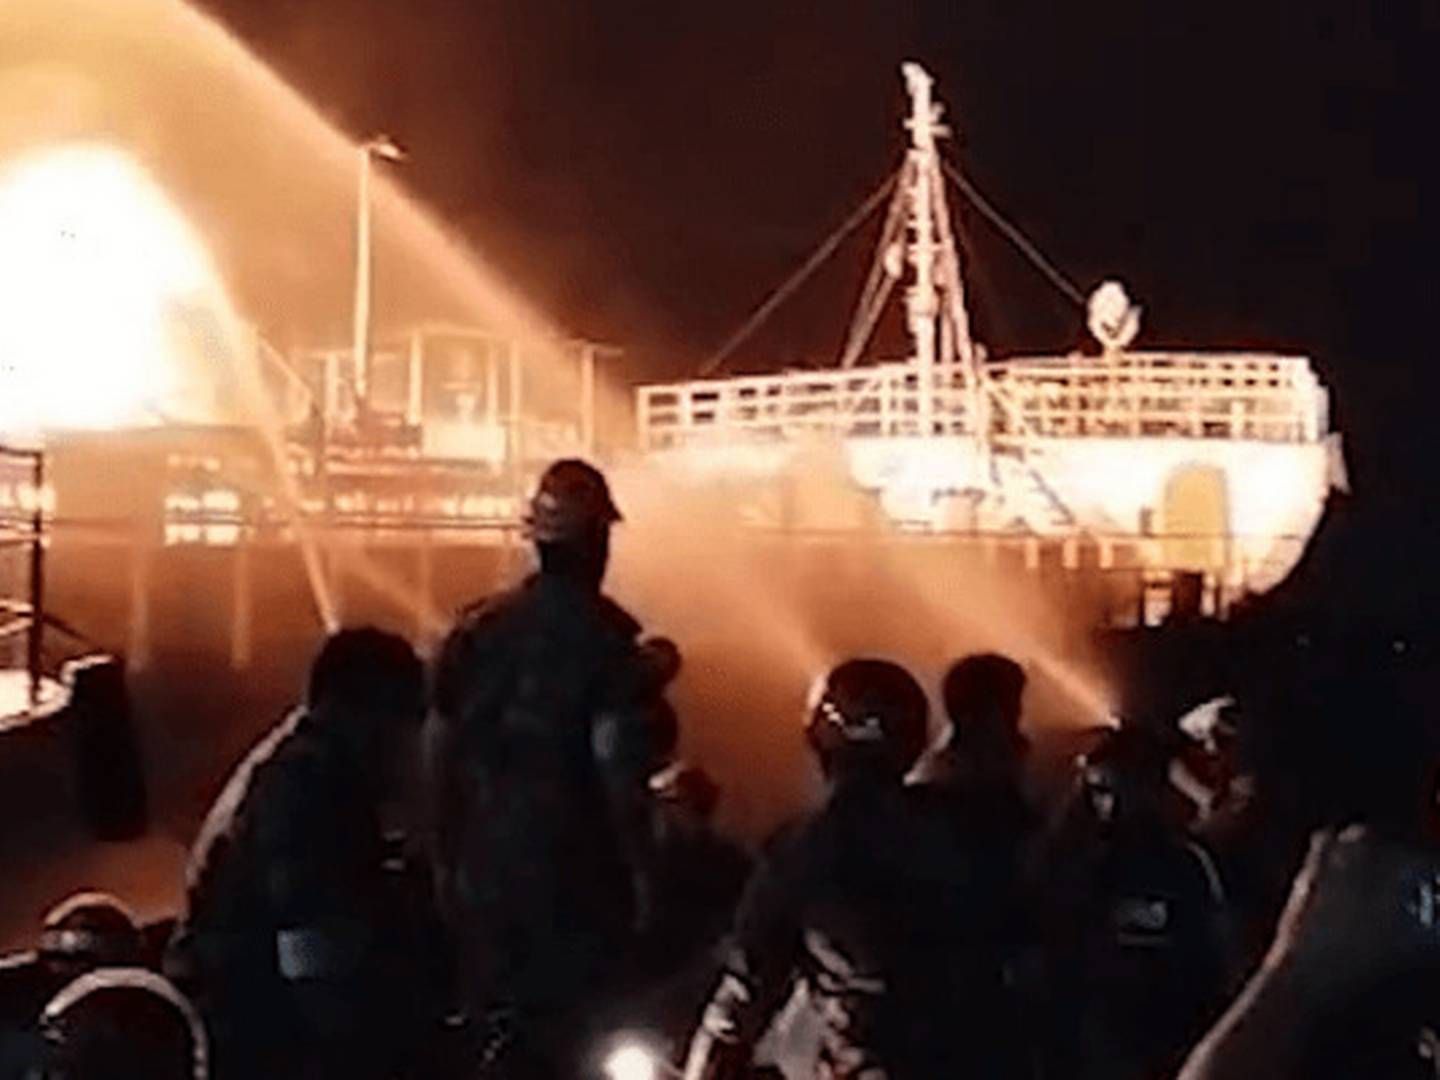 Firefighting efforts after an explosion on a tanker on the Sugandha River in Bangladesh. | Photo: Youtube